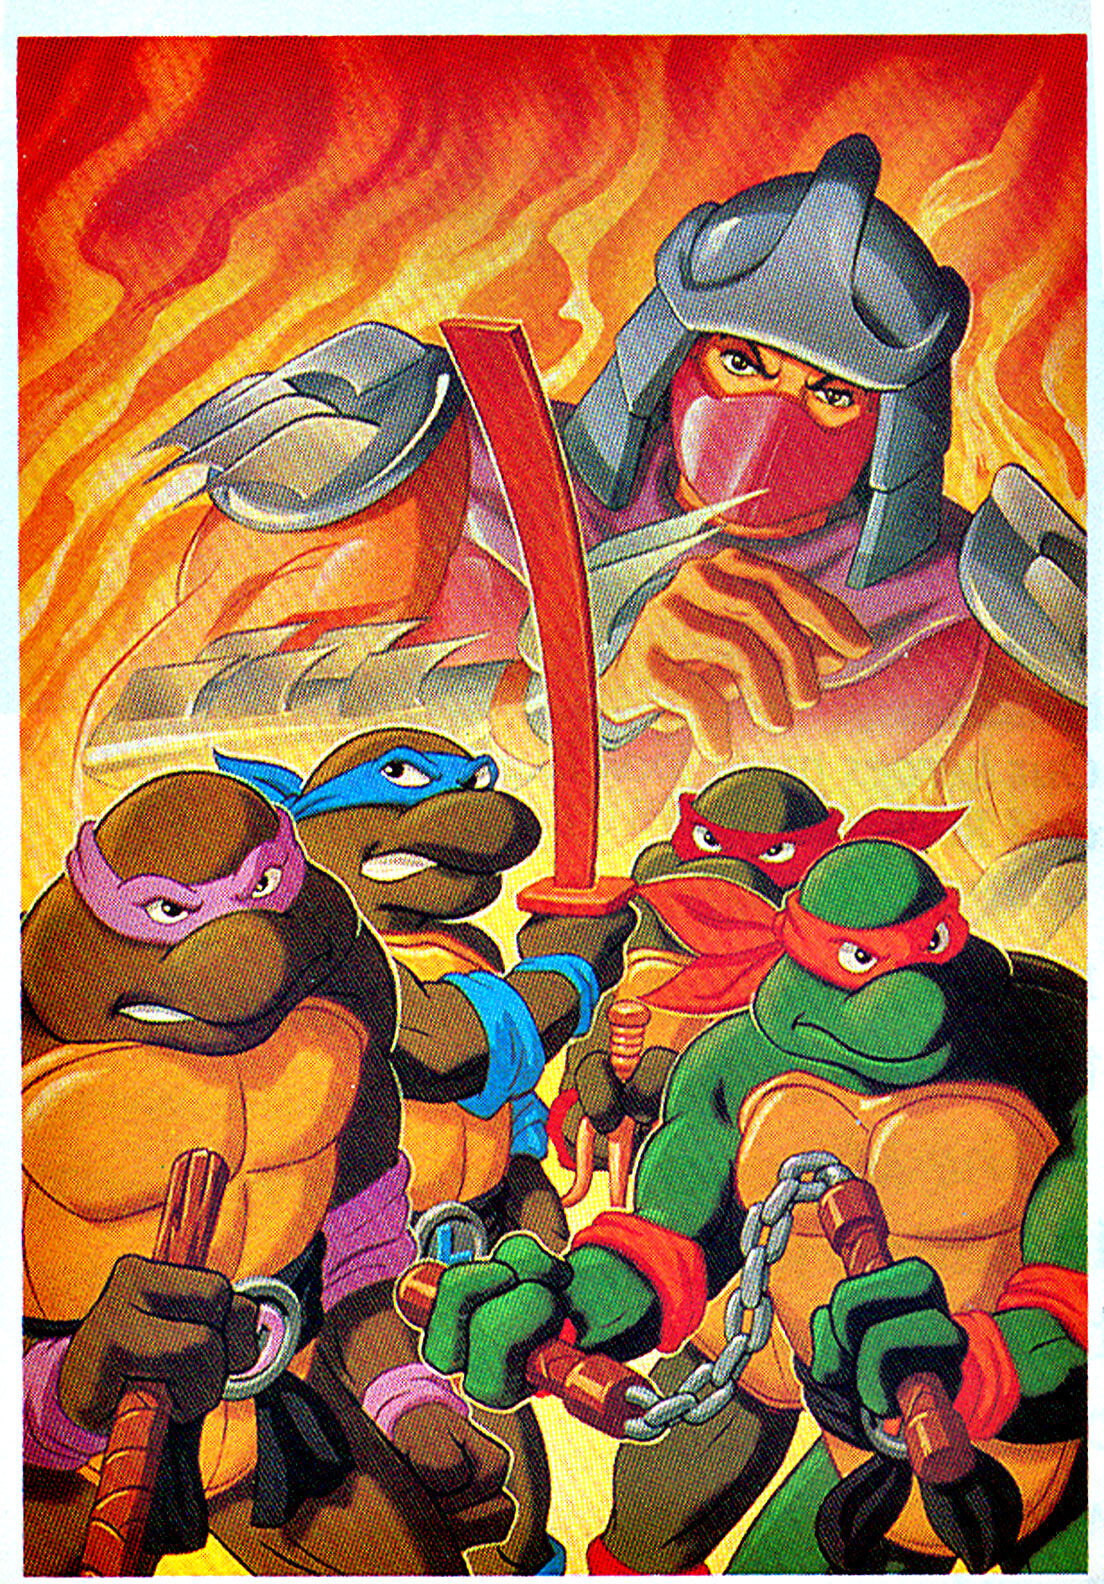 https://static.wikia.nocookie.net/tmnt/images/6/6f/1TMNT-TOS_VHS-HEROES-in-Halfshell_isolated.jpg/revision/latest/scale-to-width-down/1104?cb=20090124105237